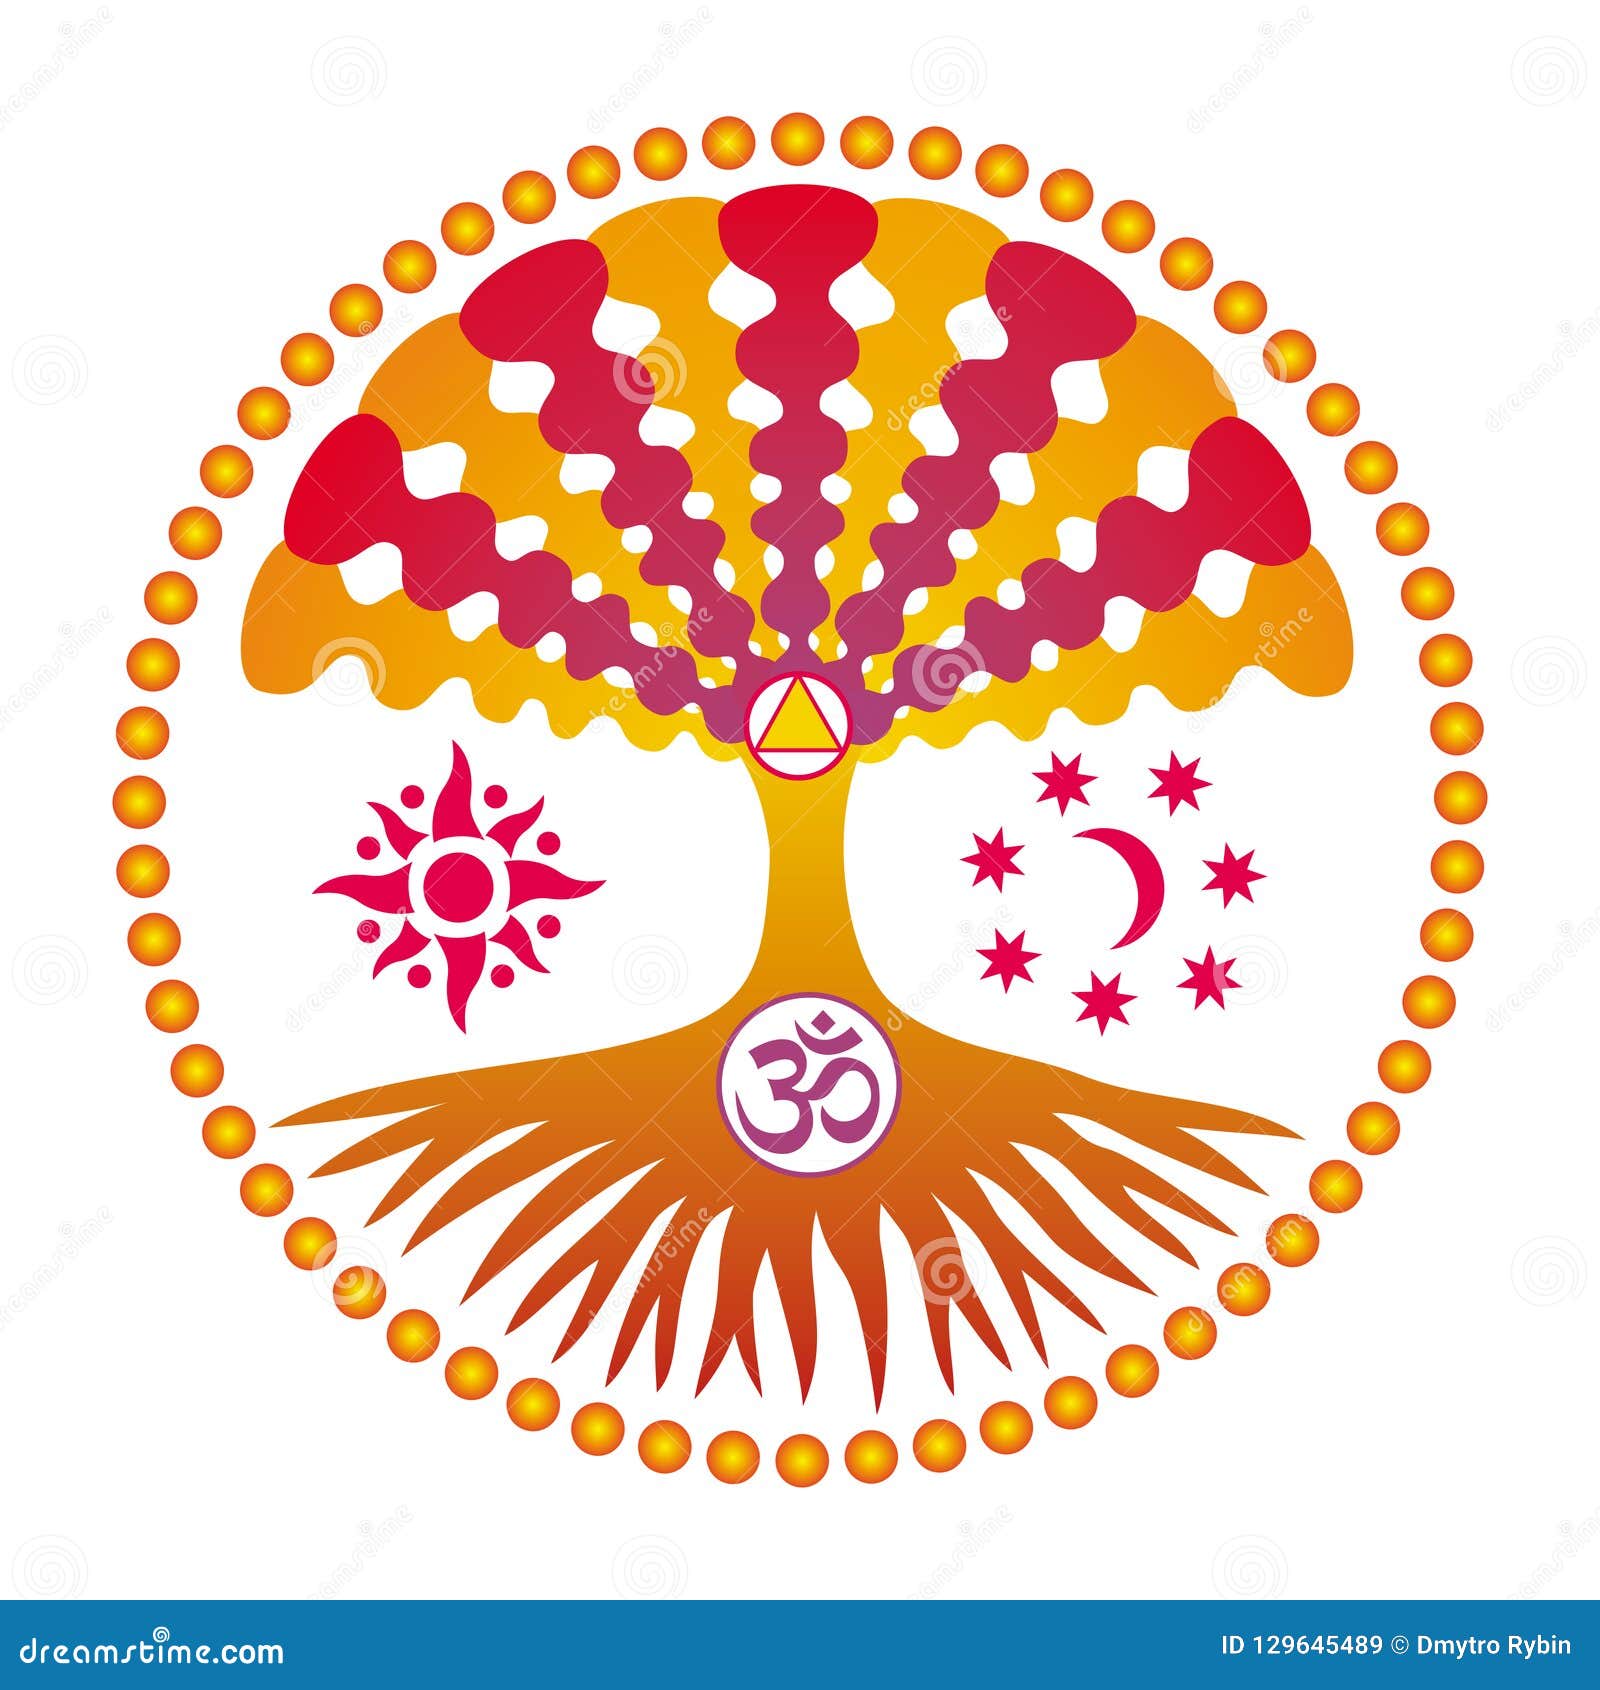 Download Mandala. The Tree Of Life In Bright Colorful Colors. Stock ...